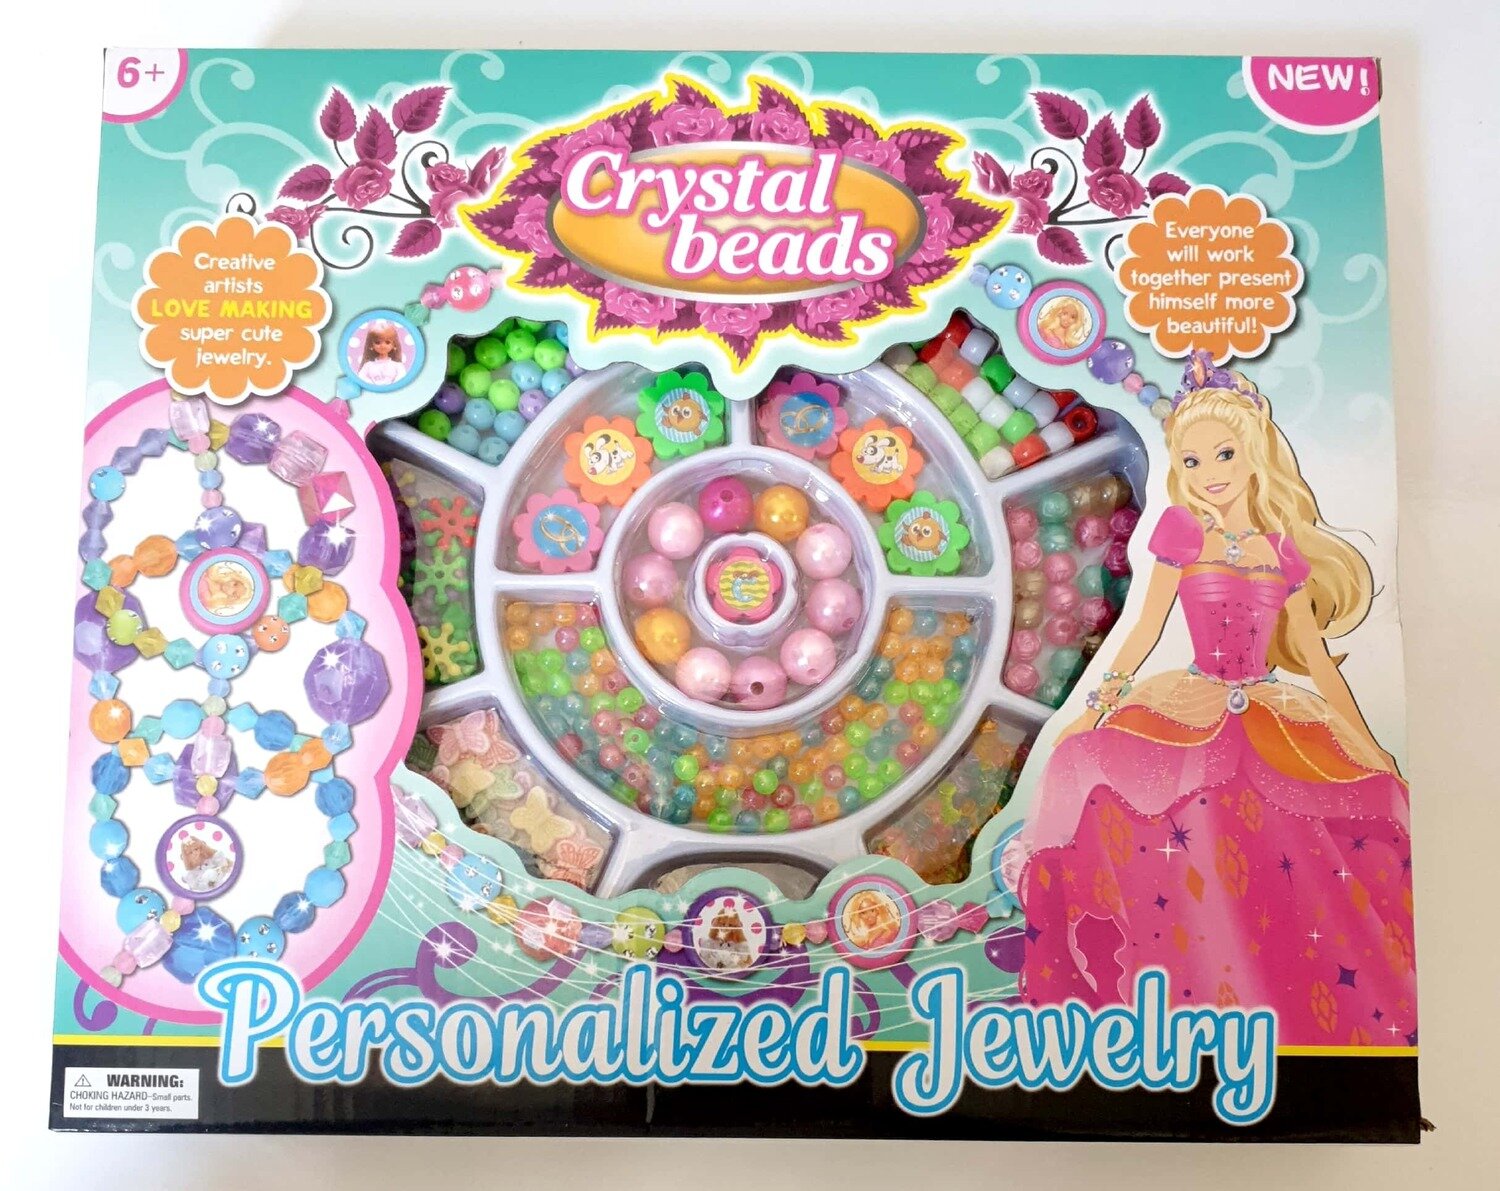 Crystal Beads 3 in 1 Princess Jewelry